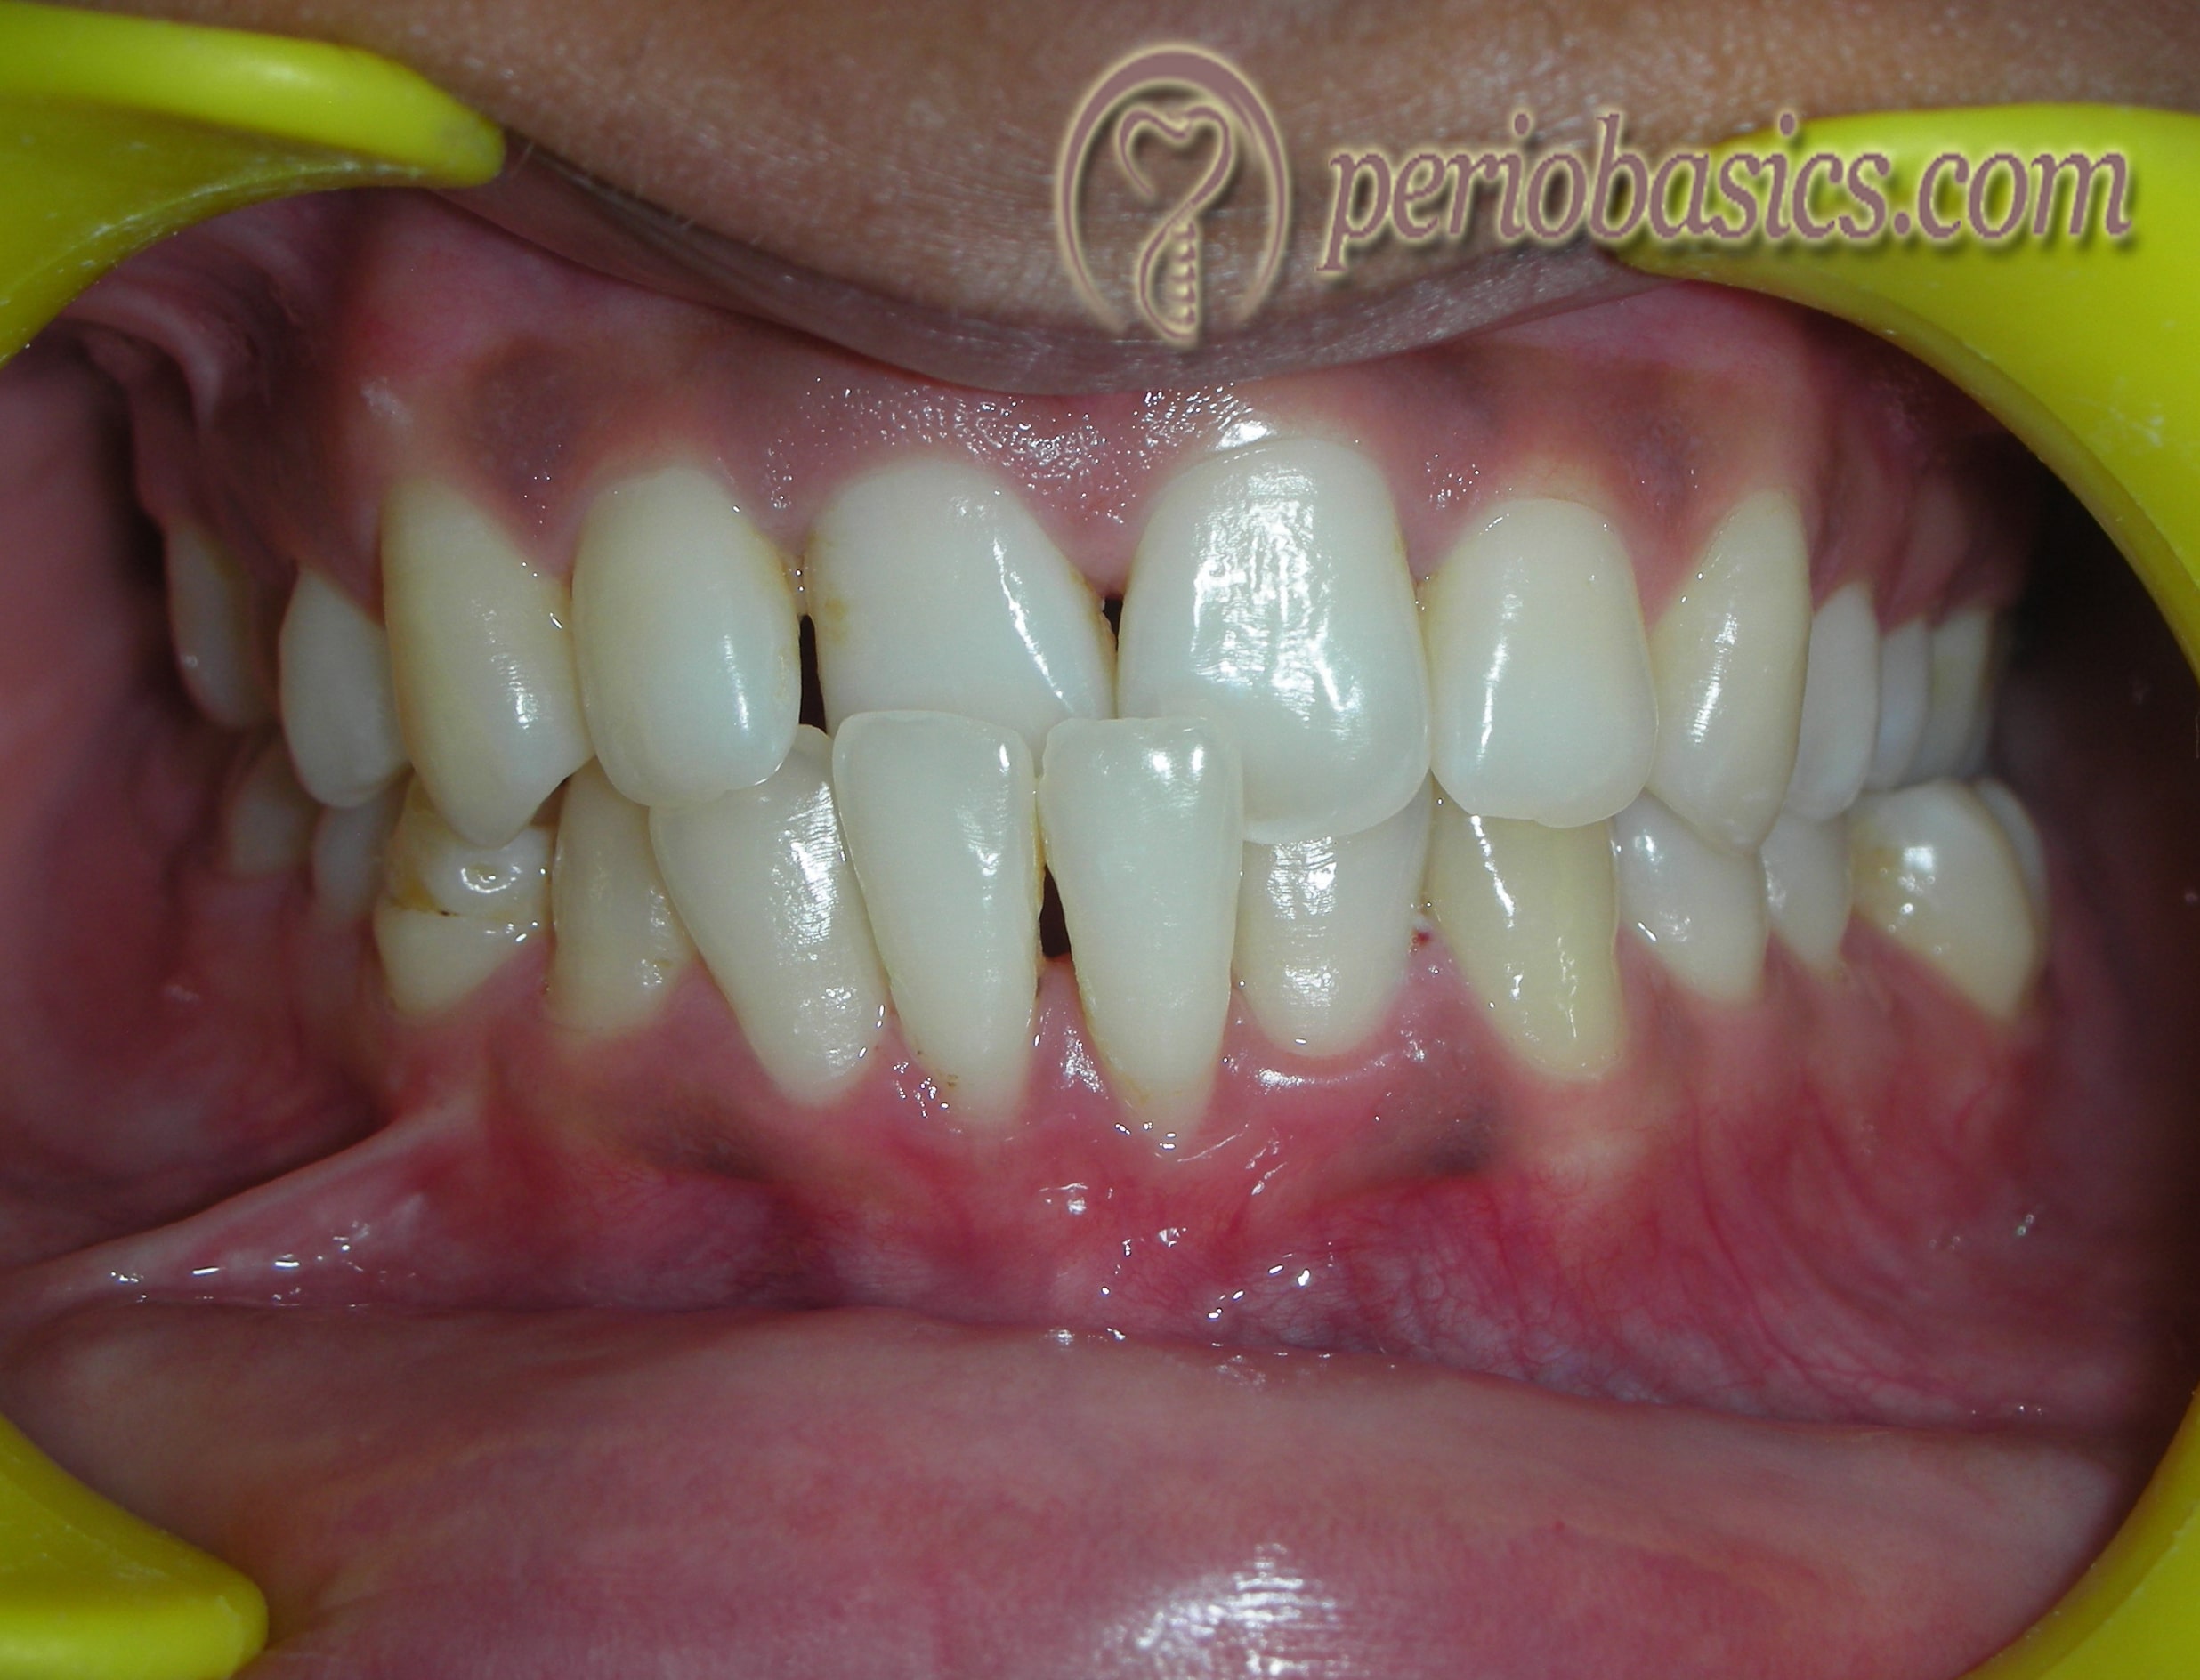 Trauma from occlusion caused in lower and upper central incisors due to cross bite.